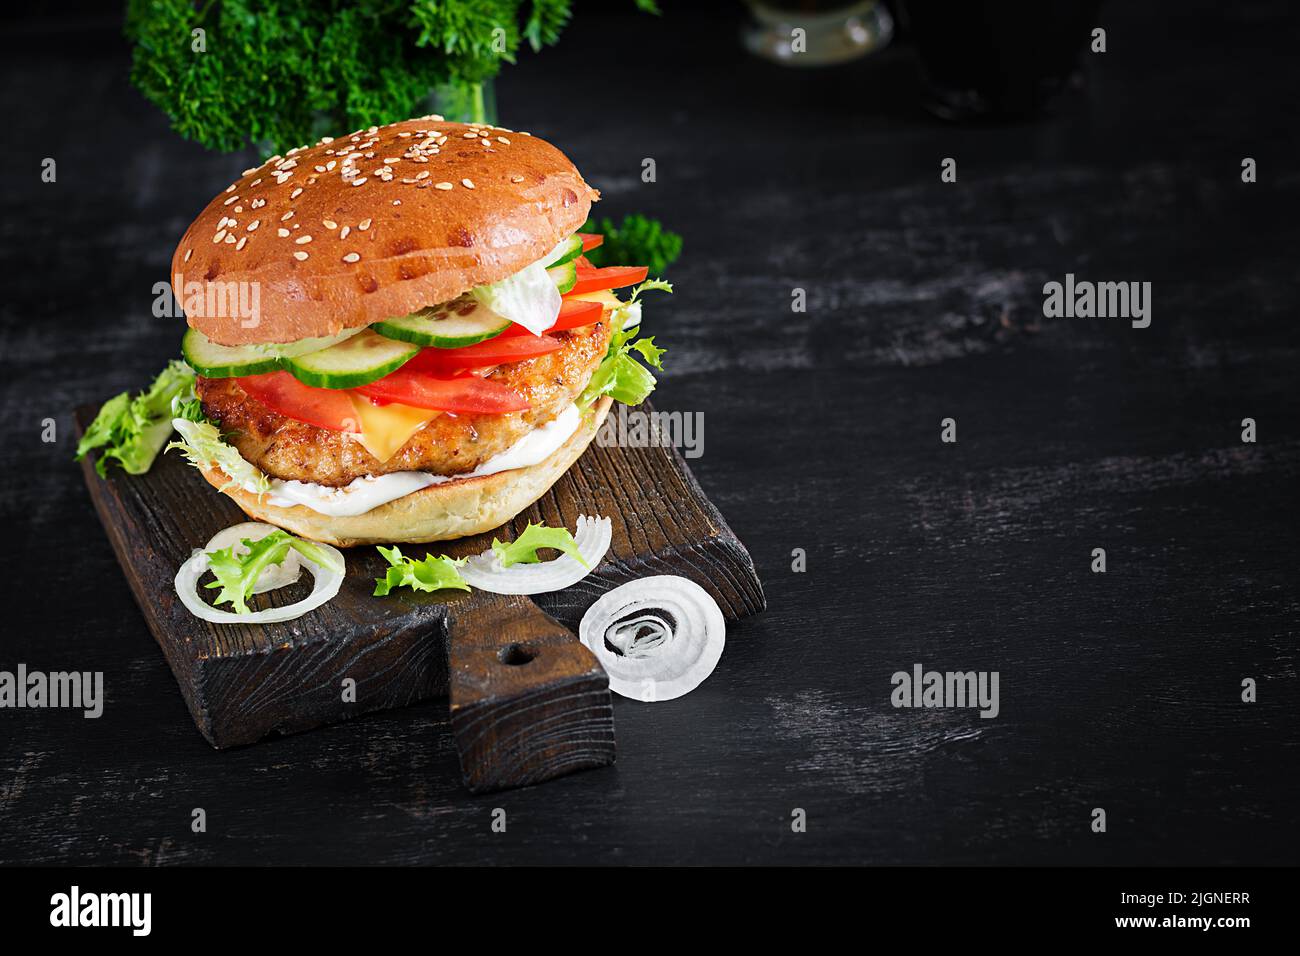 Hamburger with chicken burger meat, cheese, tomato, cucumber and lettuce on wooden background. Tasty burger. Close up Stock Photo